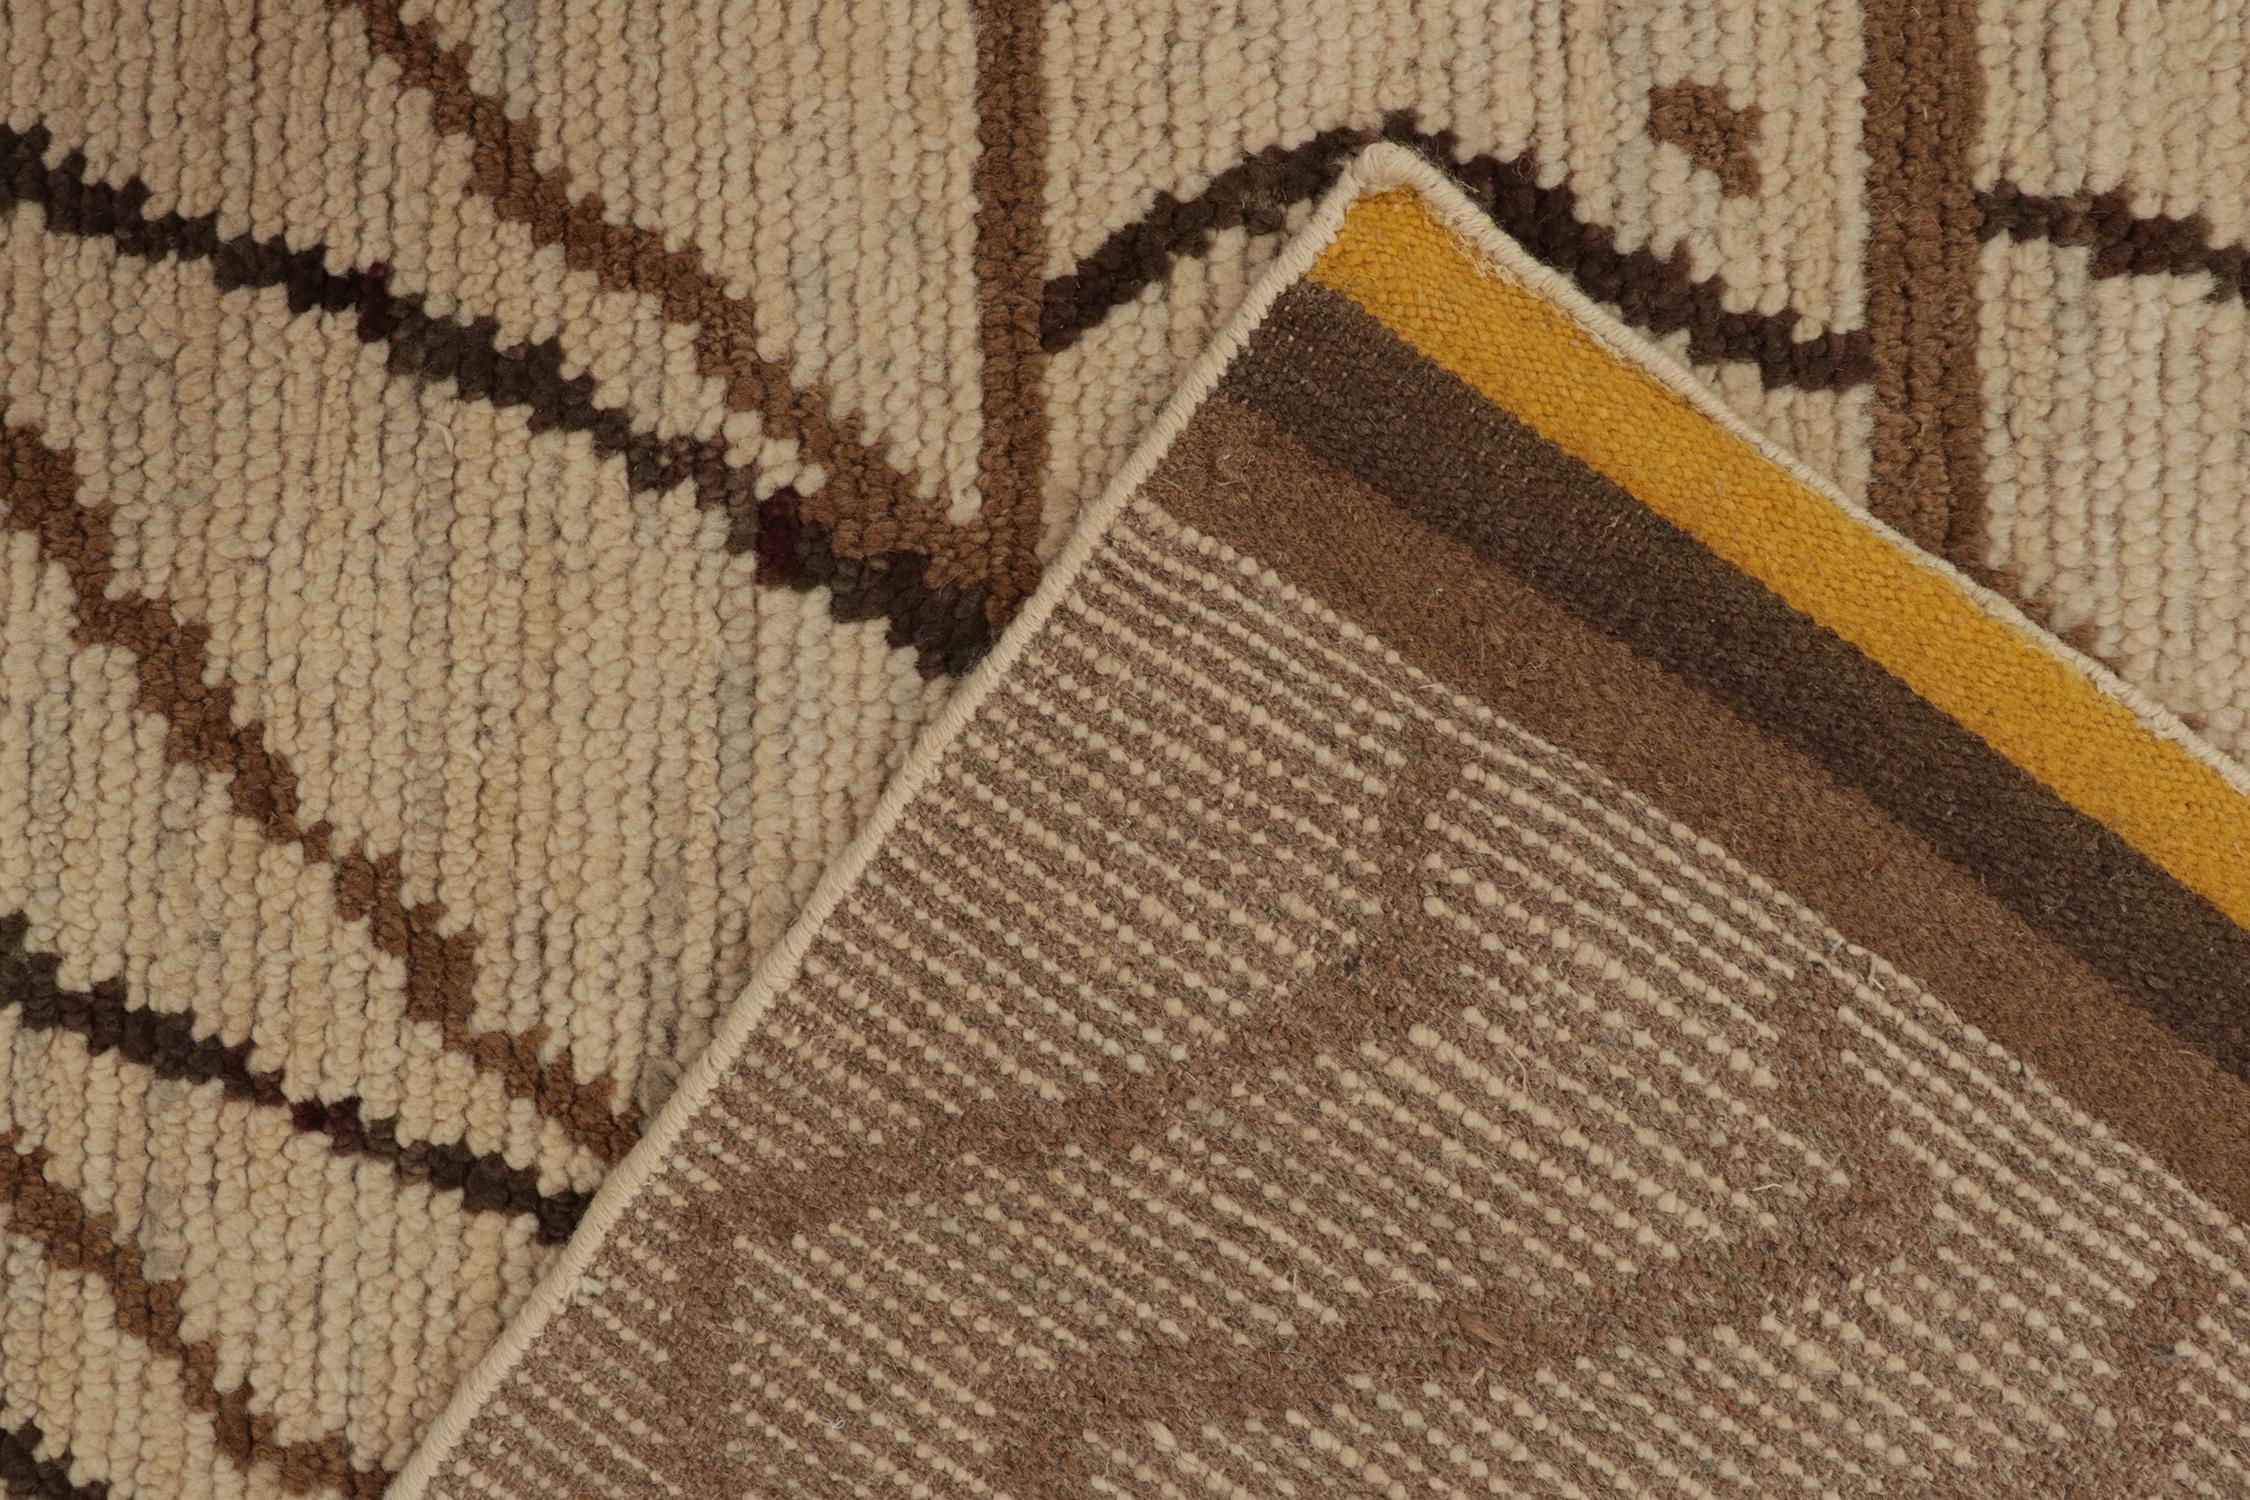 Contemporary Rug & Kilim’s Moroccan Style Rug in Beige-Brown Chevrons with Gold Accents For Sale